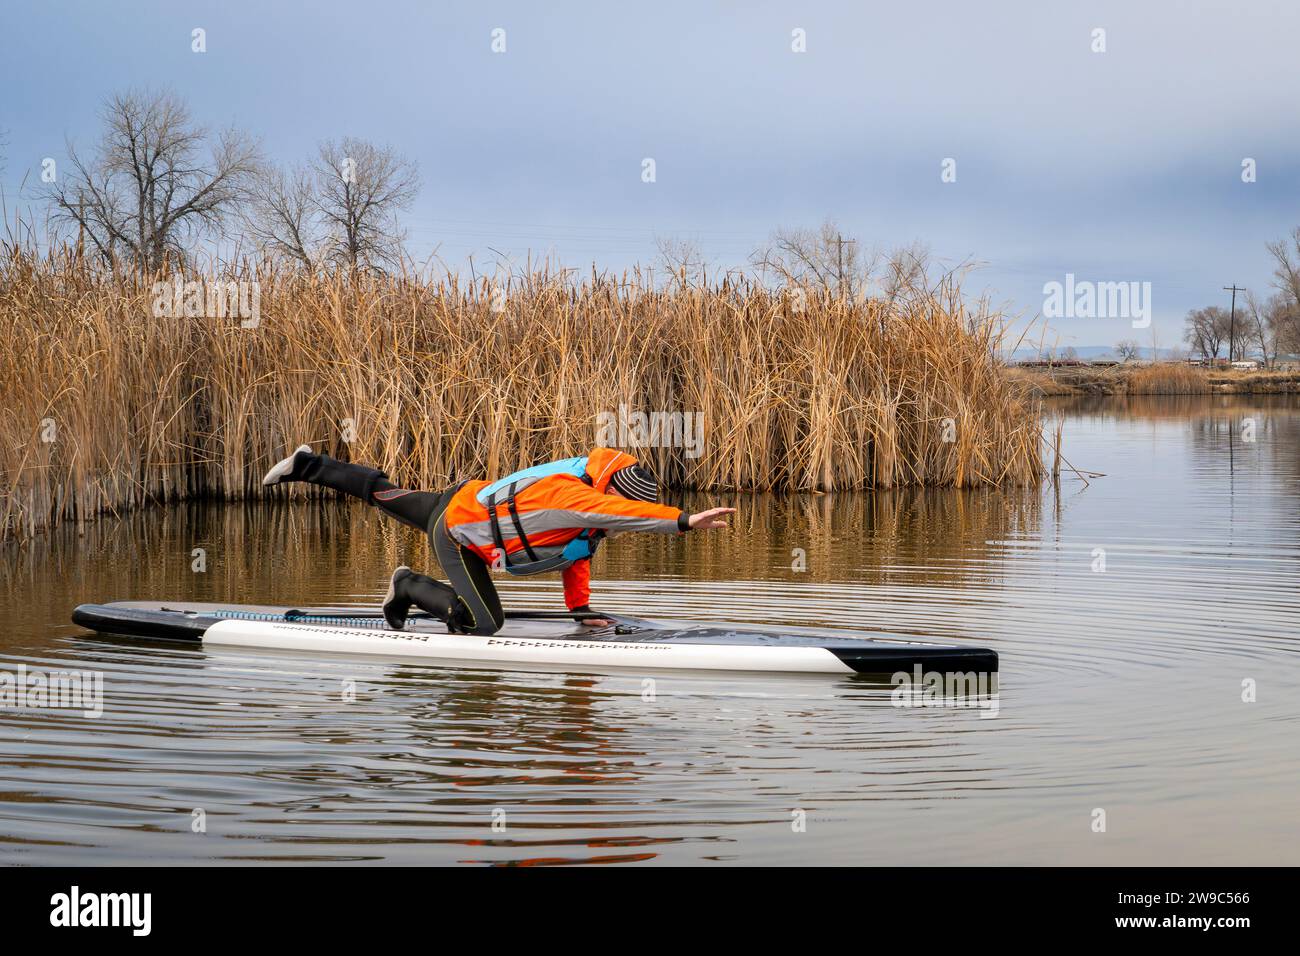 senior male stand up paddler is practicing yoga poses on his paddleboard on a lake in Colorado, winter or fall scenery Stock Photo